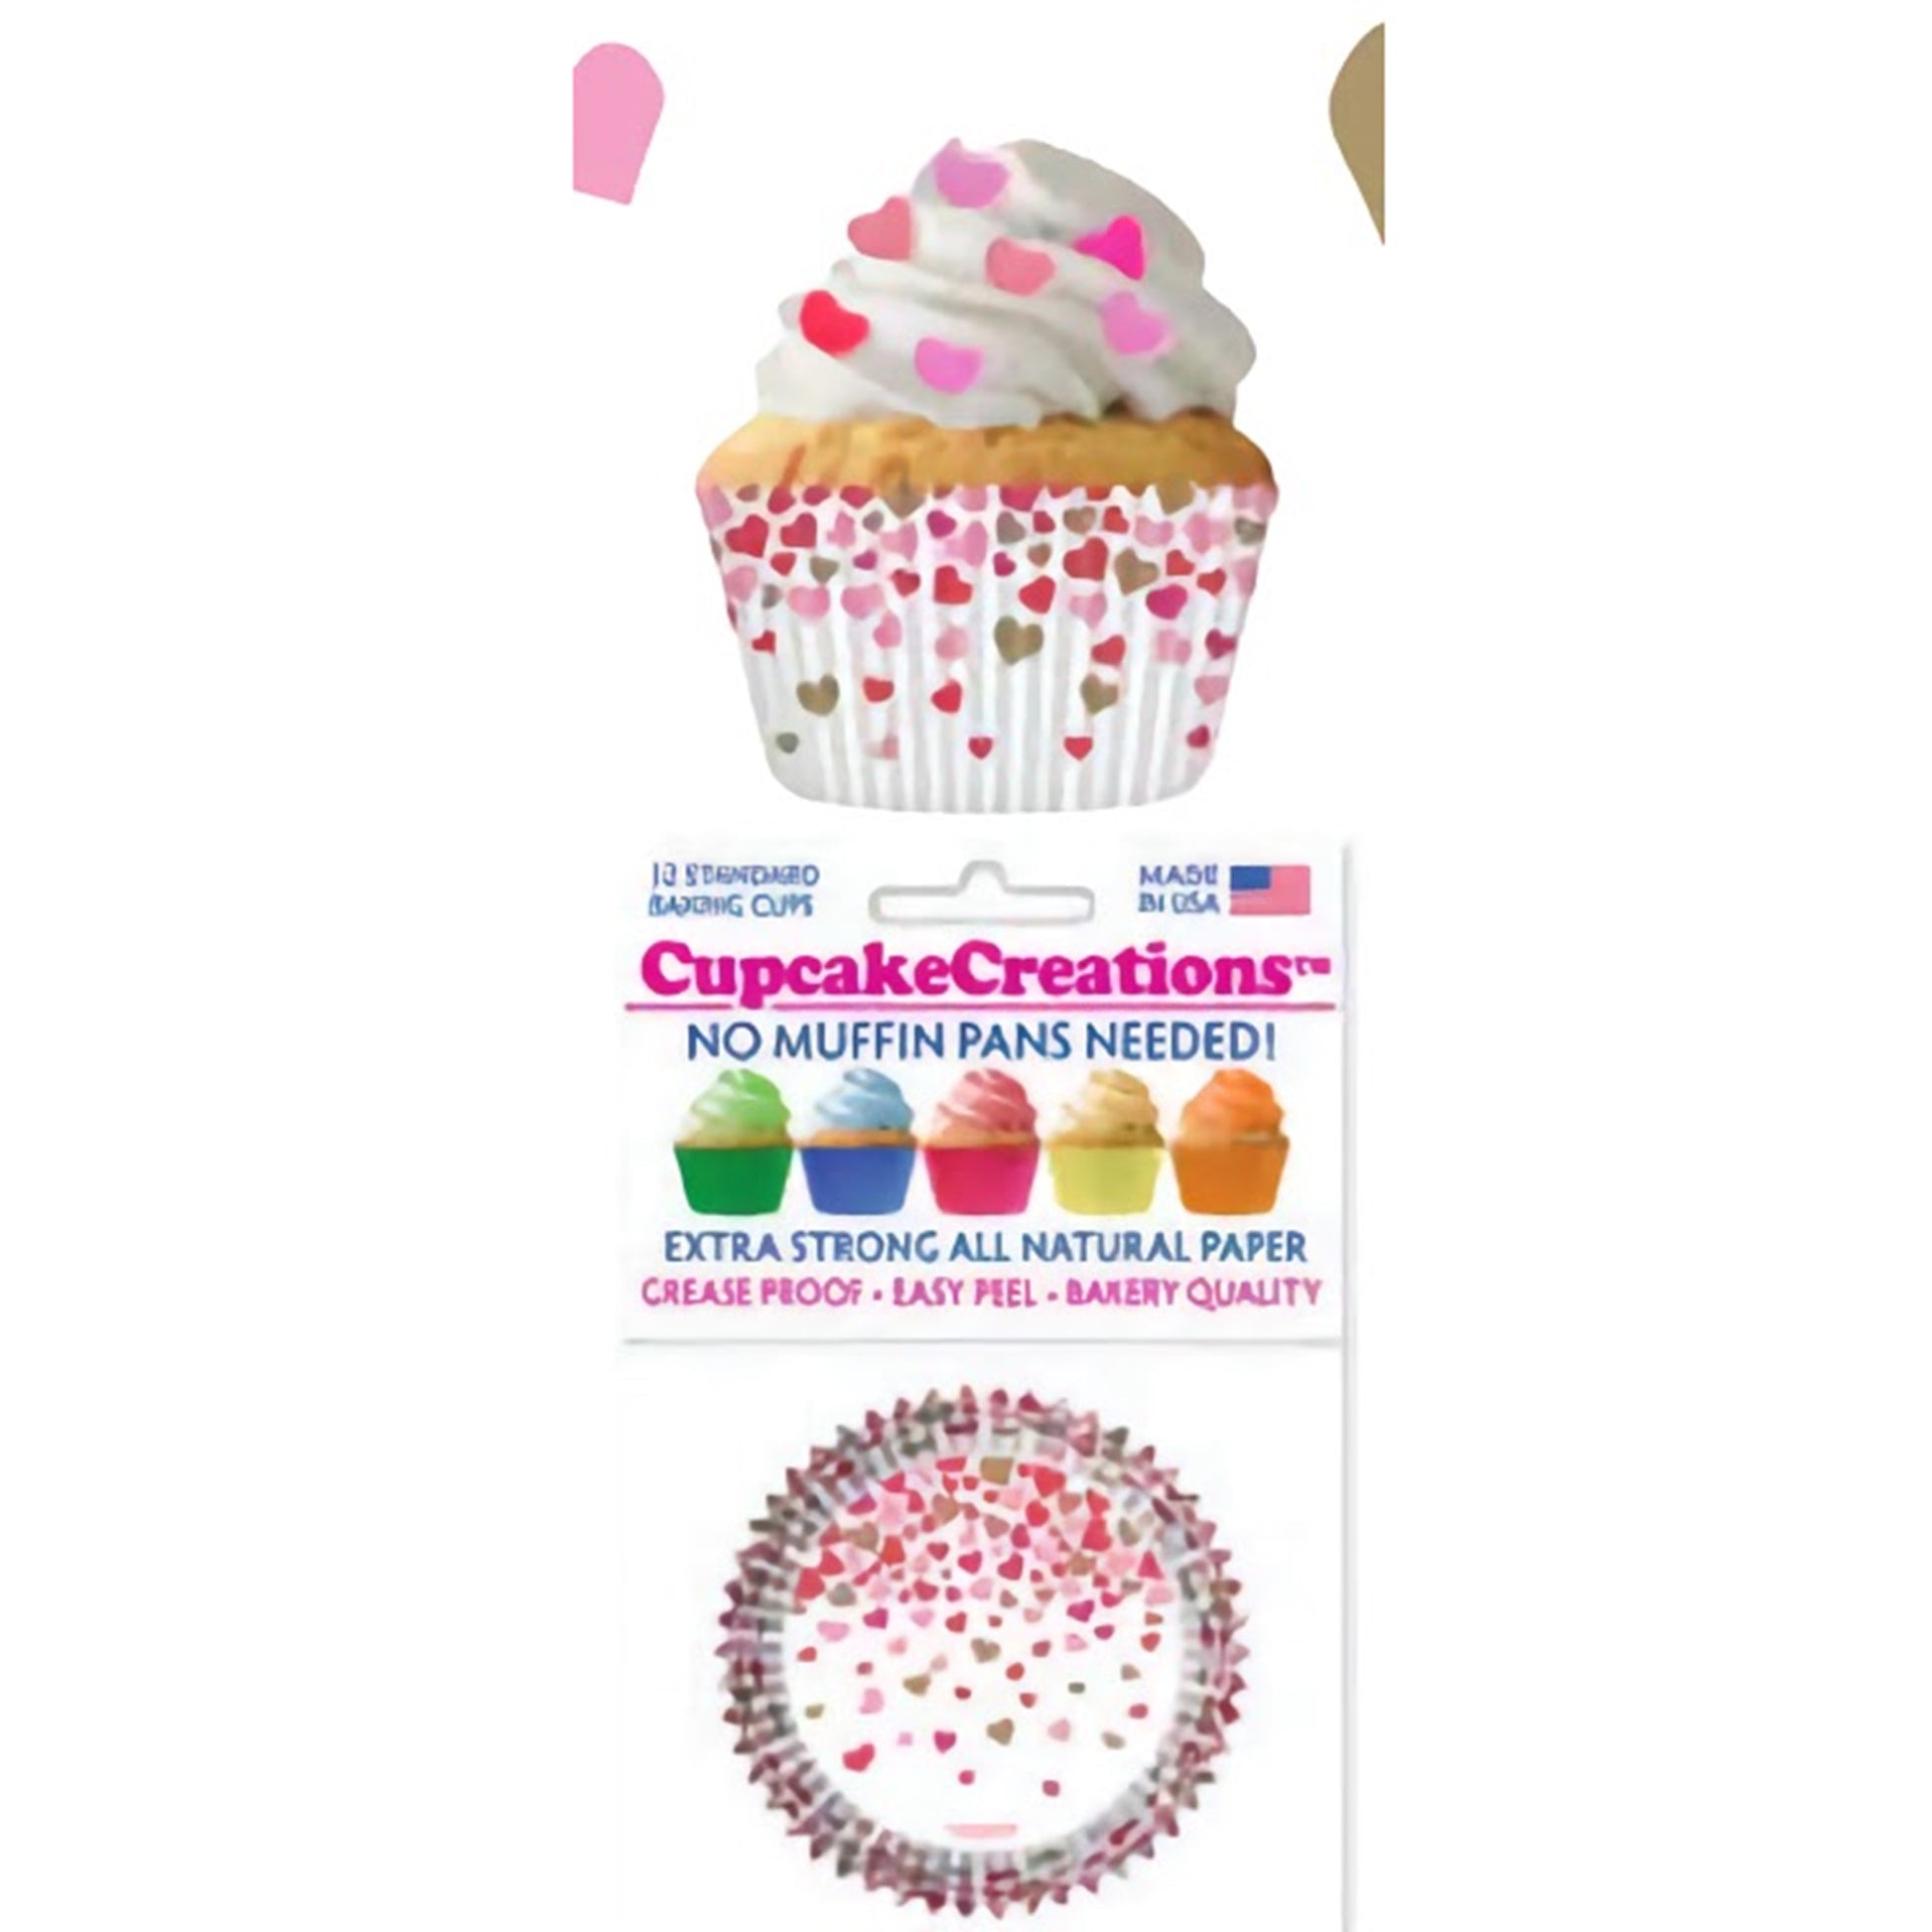 The image depicts a set of Cupcake Creations baking cups, with the design featuring a pattern of falling pink and red hearts against a white background. The packaging indicates that no muffin pans are needed, and highlights the baking cups' extra strong, all-natural paper quality that's crease-proof and easy-peel. It's labeled as bakery quality and made in the USA.